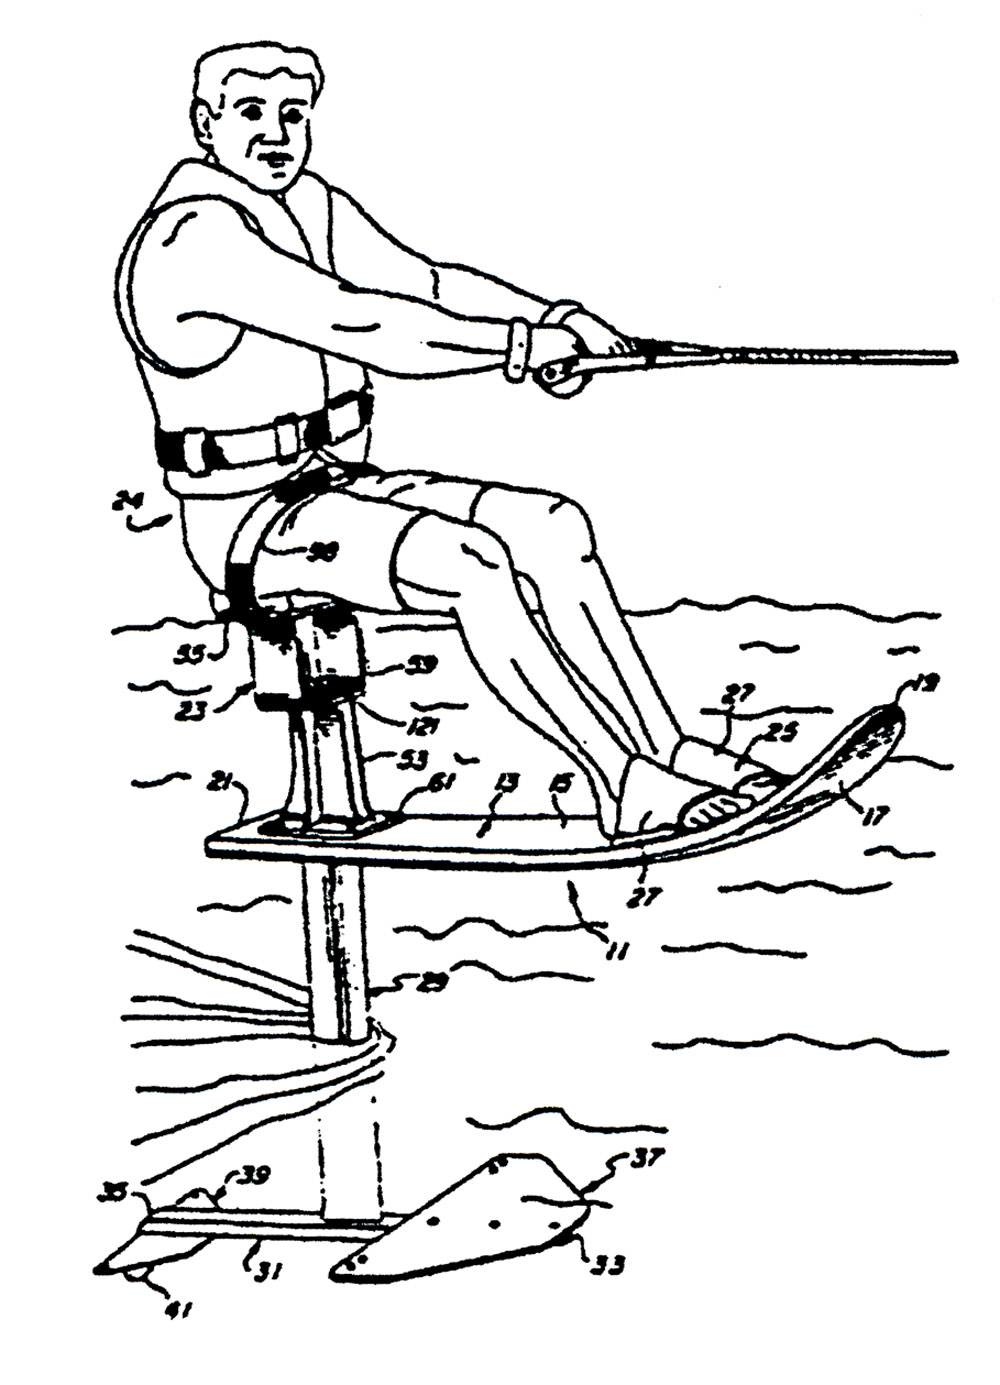 adventures-water-skiing-hydrofoiling-1989-patent-drawing